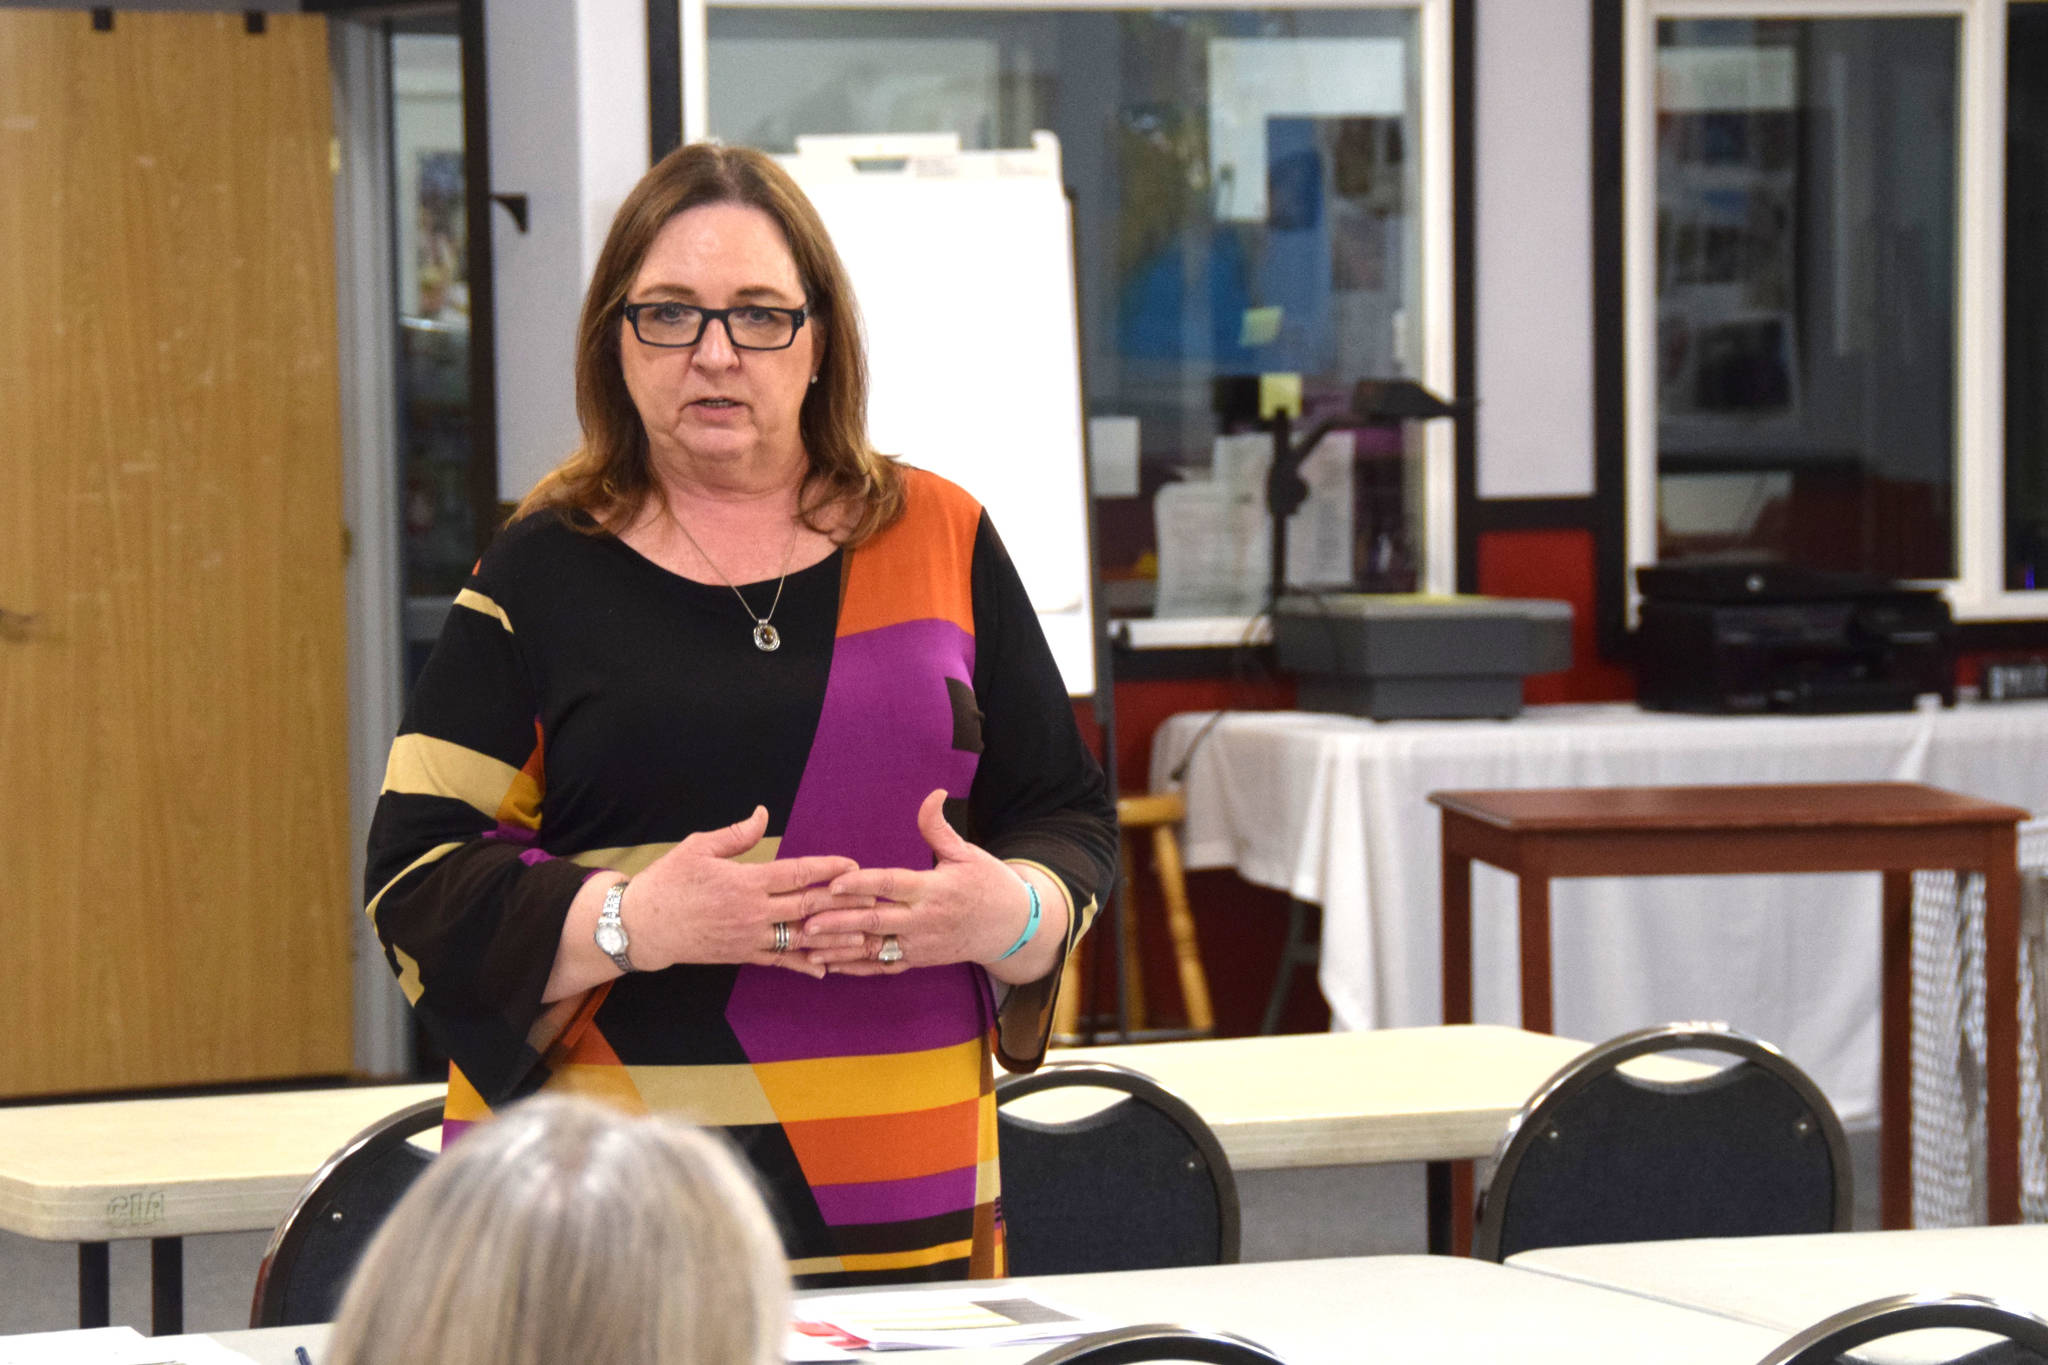 Love, INC’s executive director Leslie Rohr leads the Shelter Development workgroup at Love, INC in Soldotna on Thursday, Feb. 7. (Photo by Brian Mazurek/Peninsula Clarion)